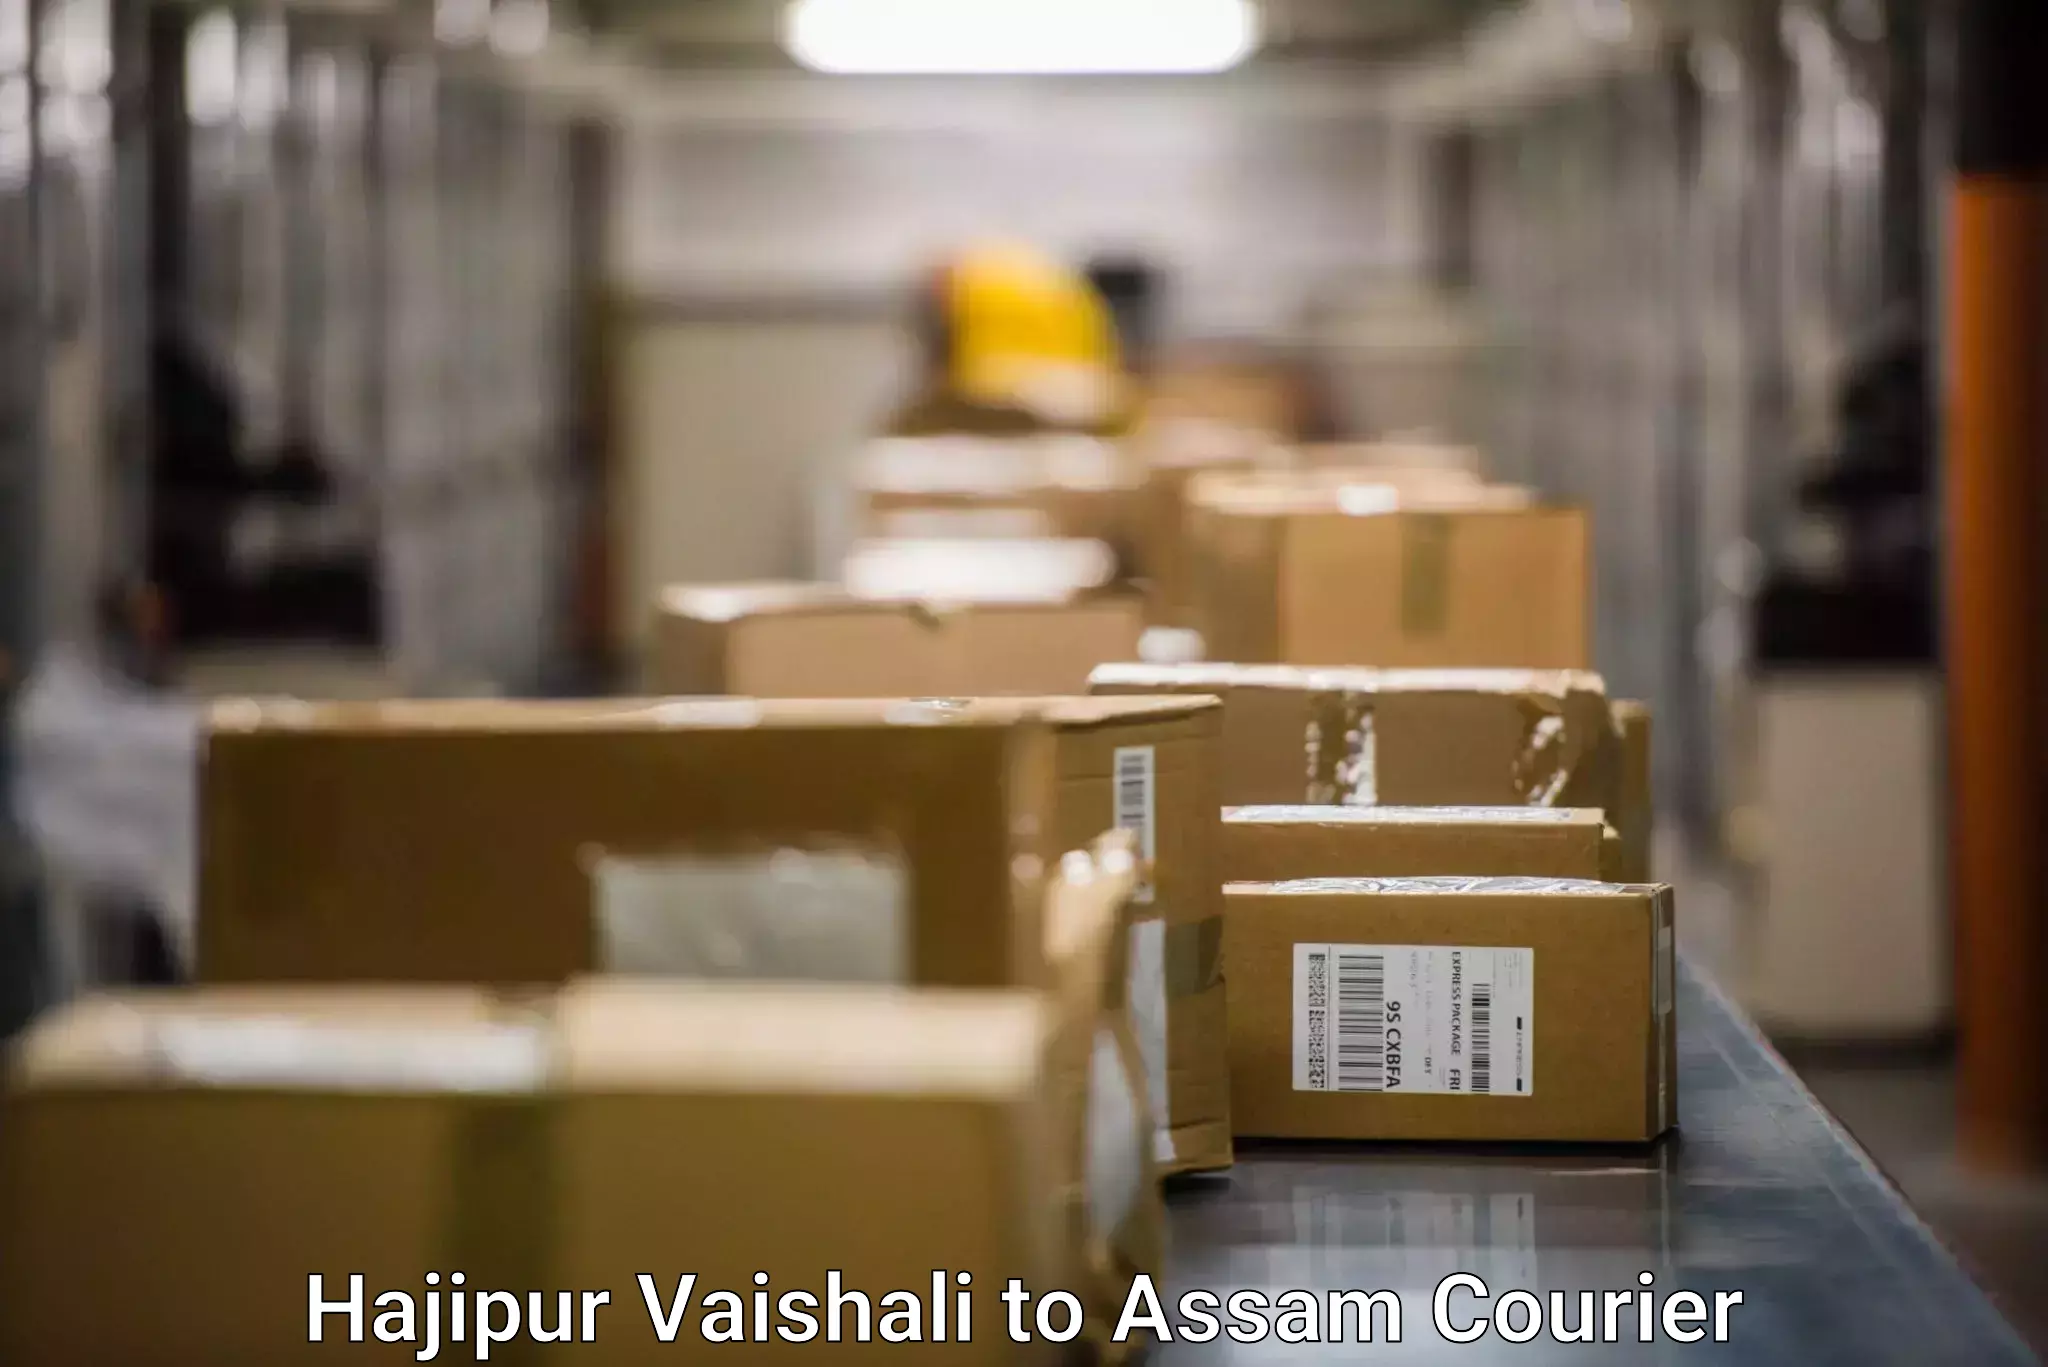 High value parcel delivery in Hajipur Vaishali to Udharbond